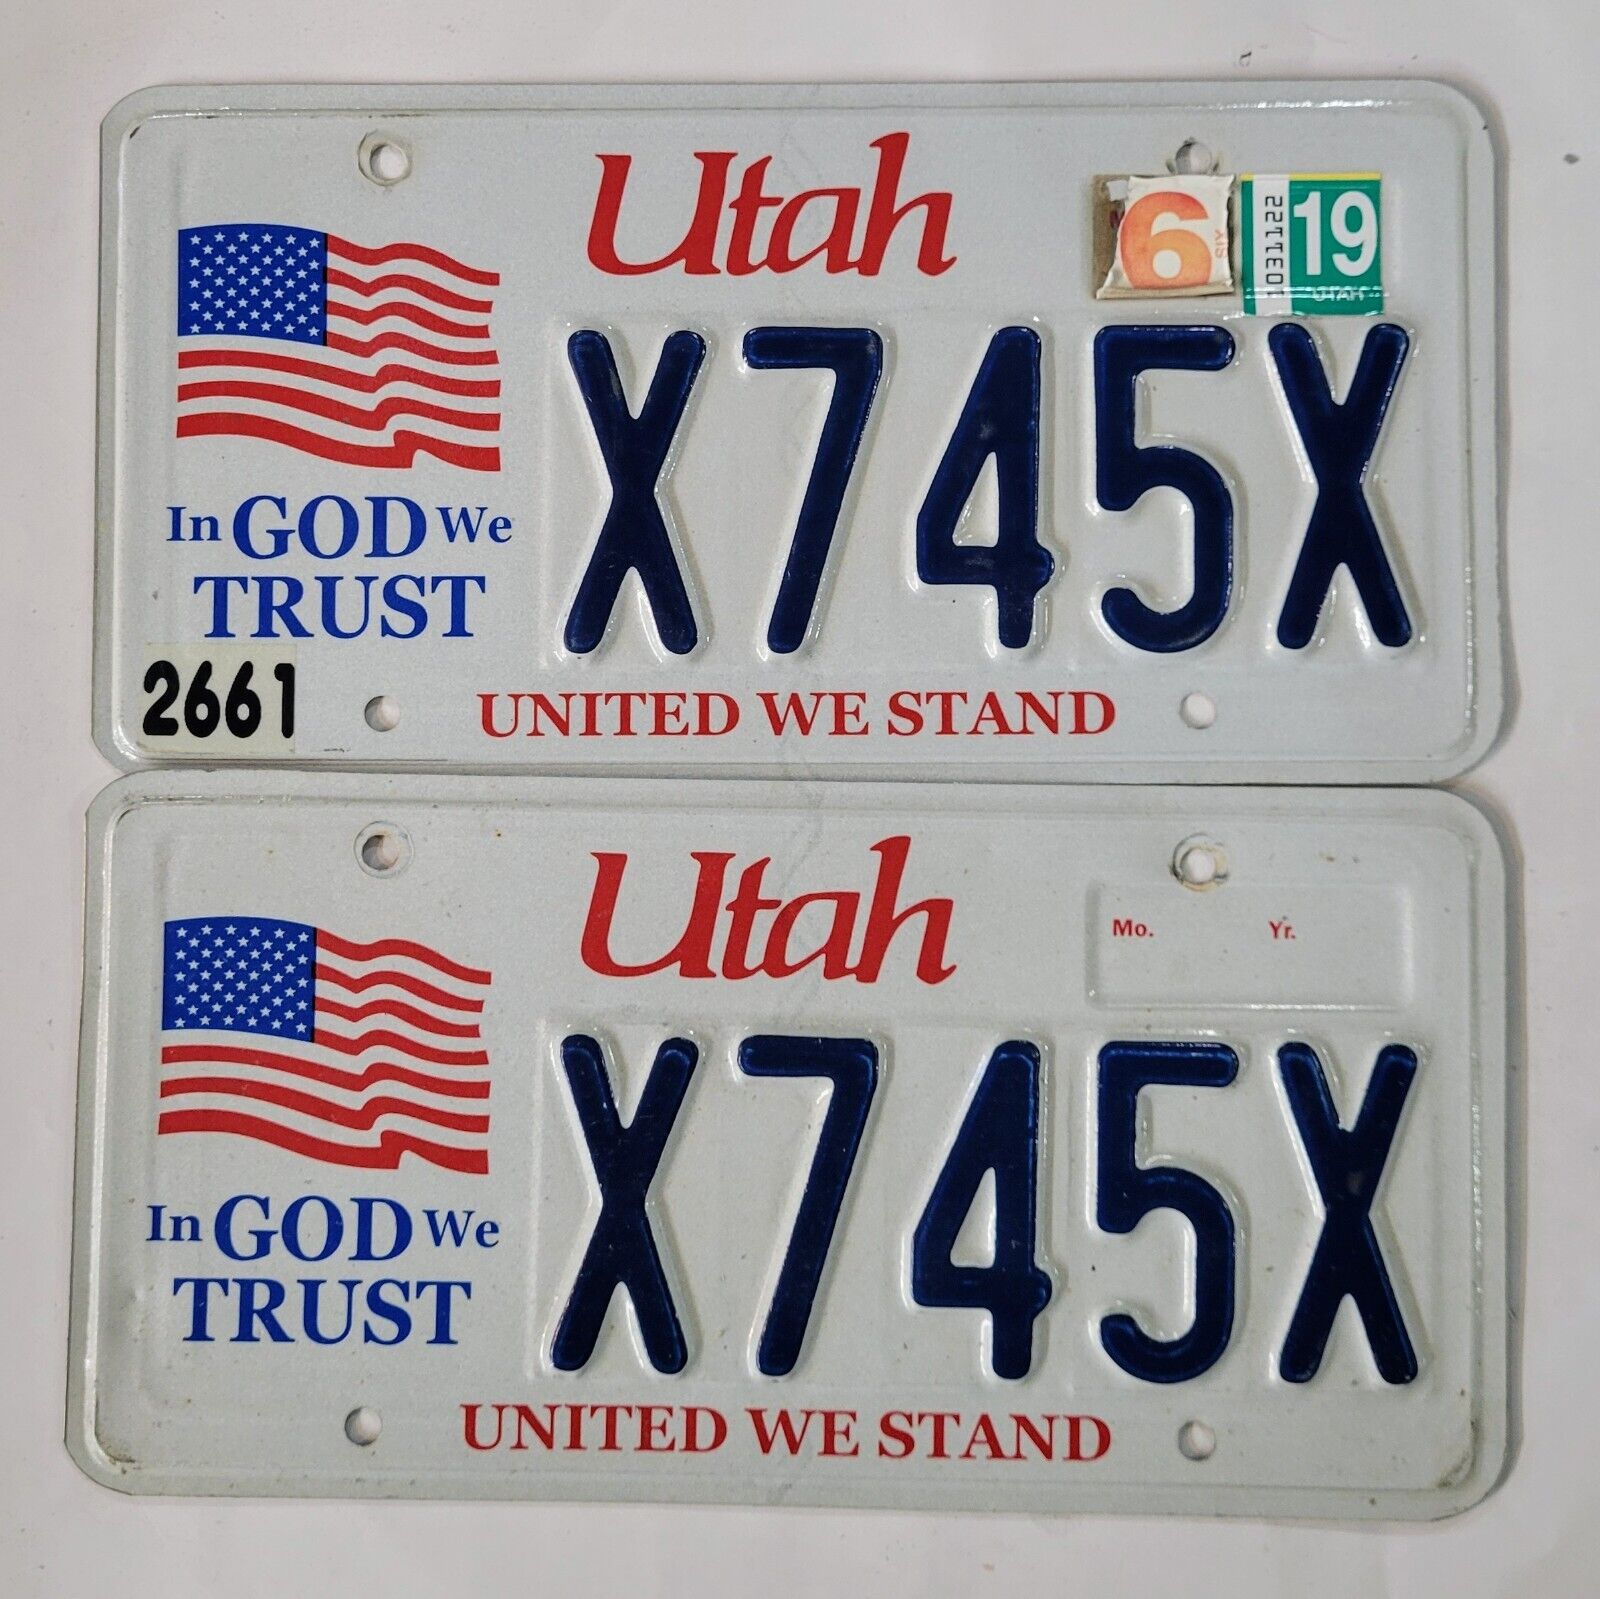 UTAH Graphic License Plate Pair ~ X745X ~🔥FREE SHIPPING🔥UNITED WE STAND 